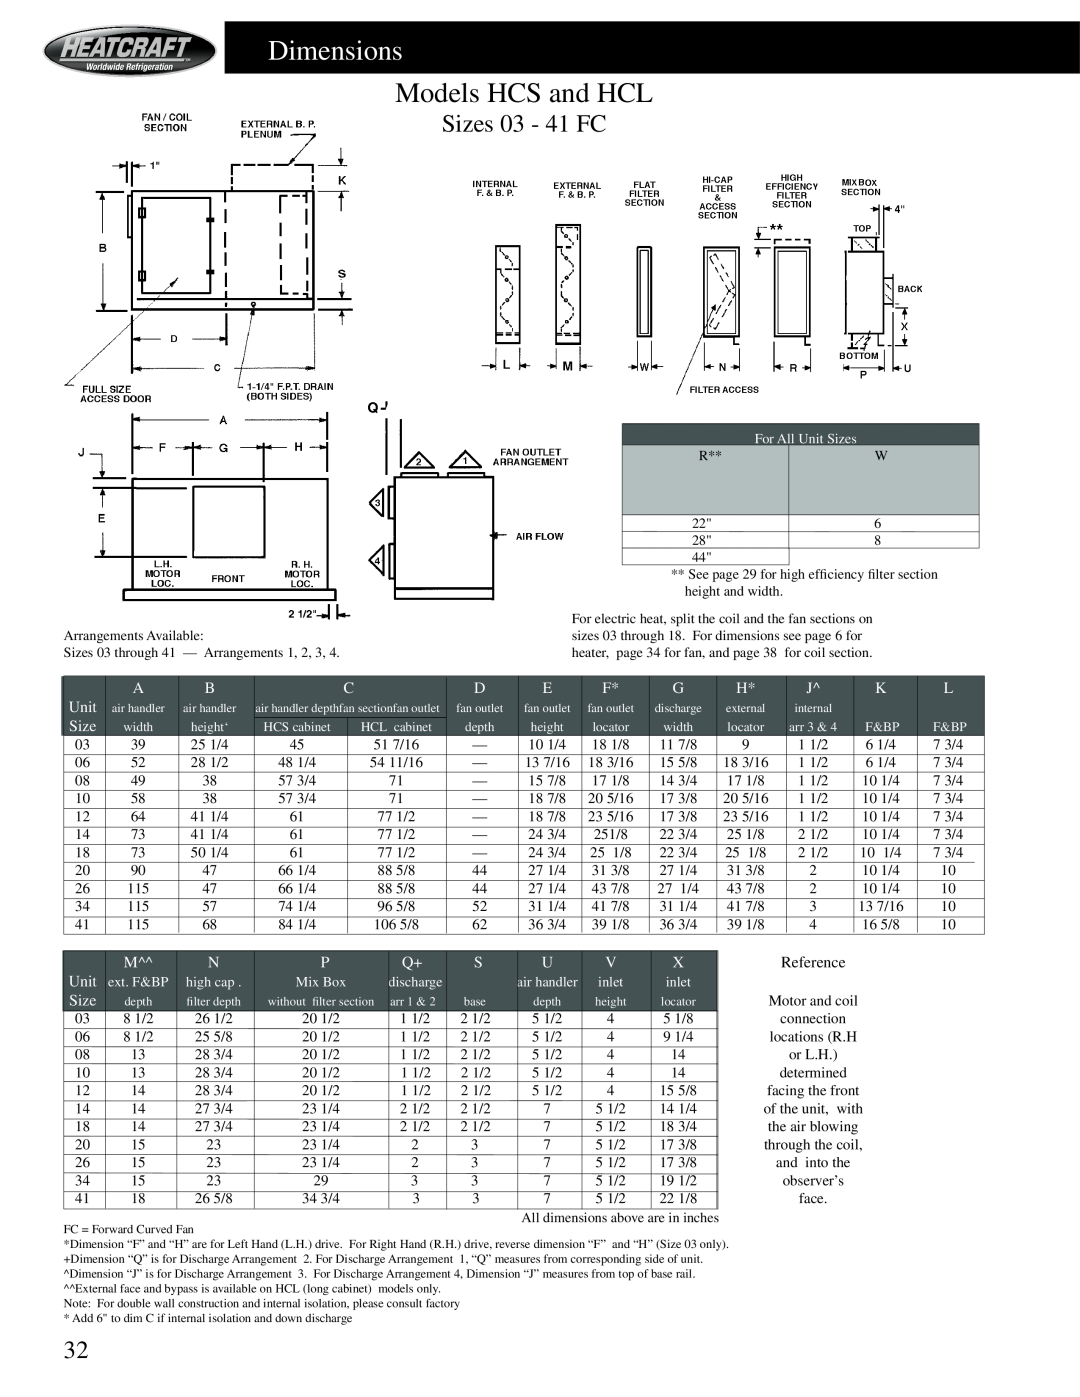 Heatcraft Refrigeration Products manual Models HCS and HCL, Sizes 03 - 41 FC, Dimensions 